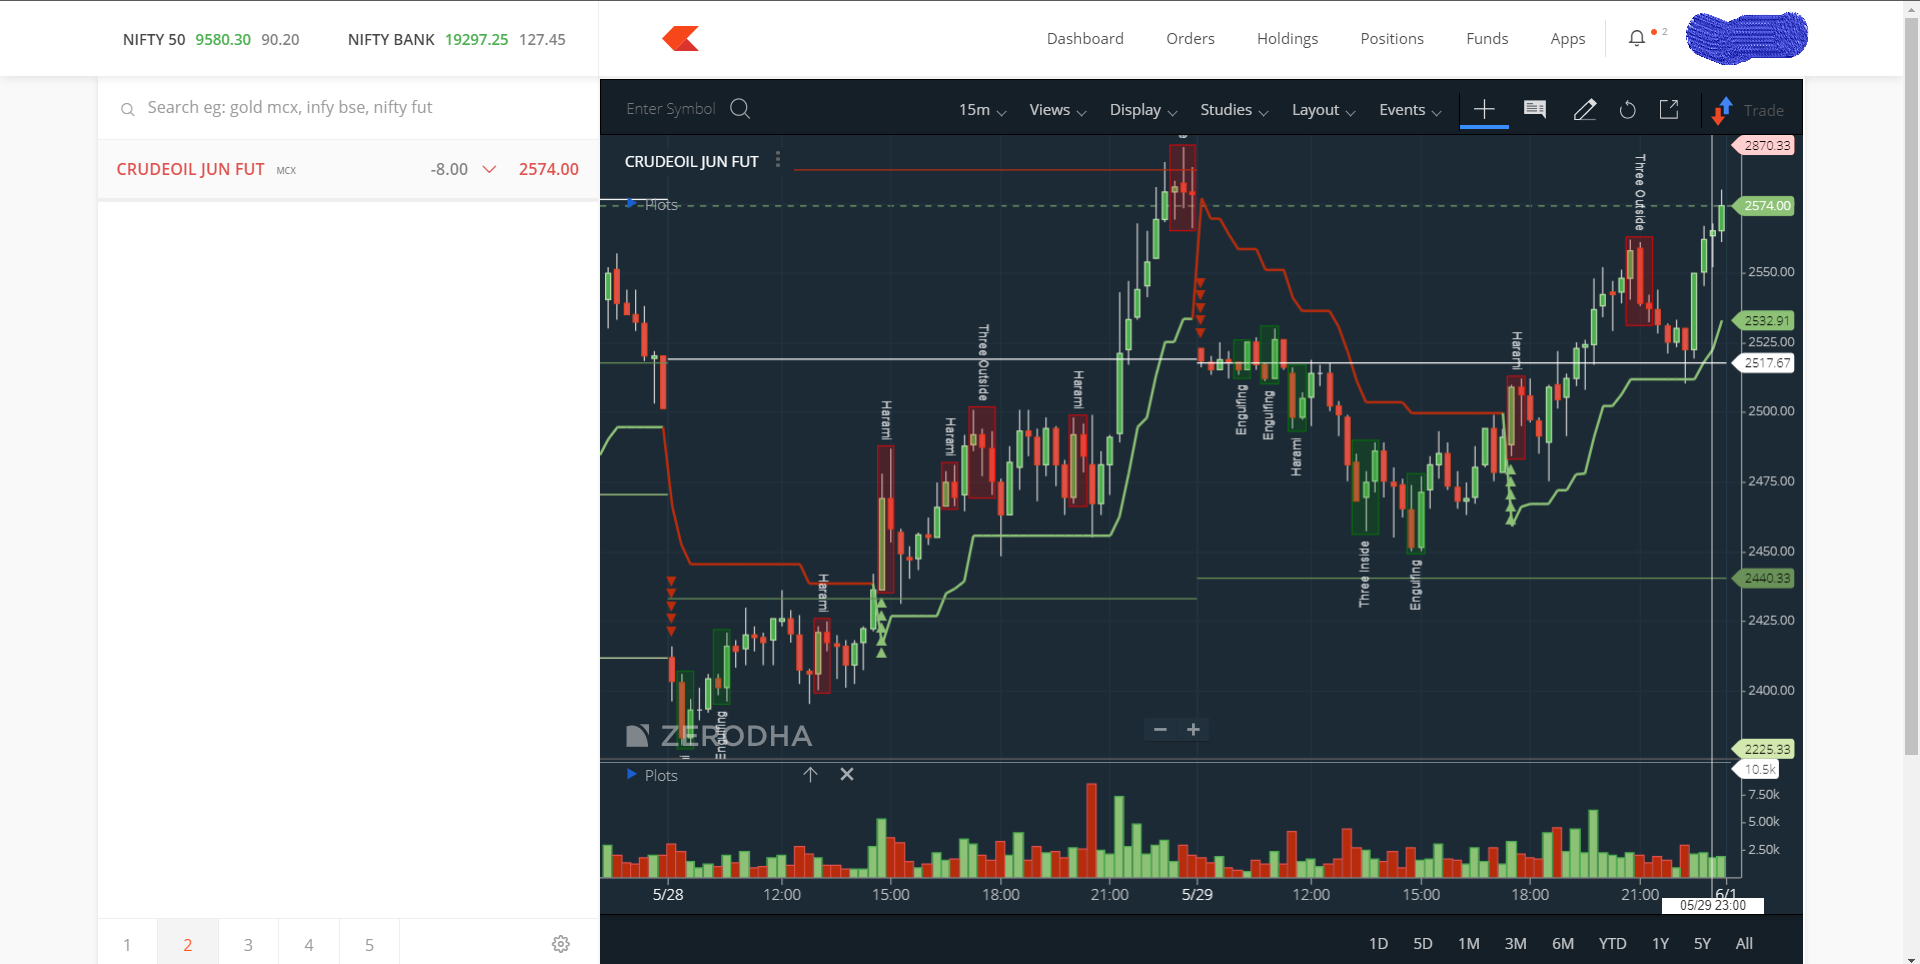 Has anyone noticed "Trade from chart option" today on ...